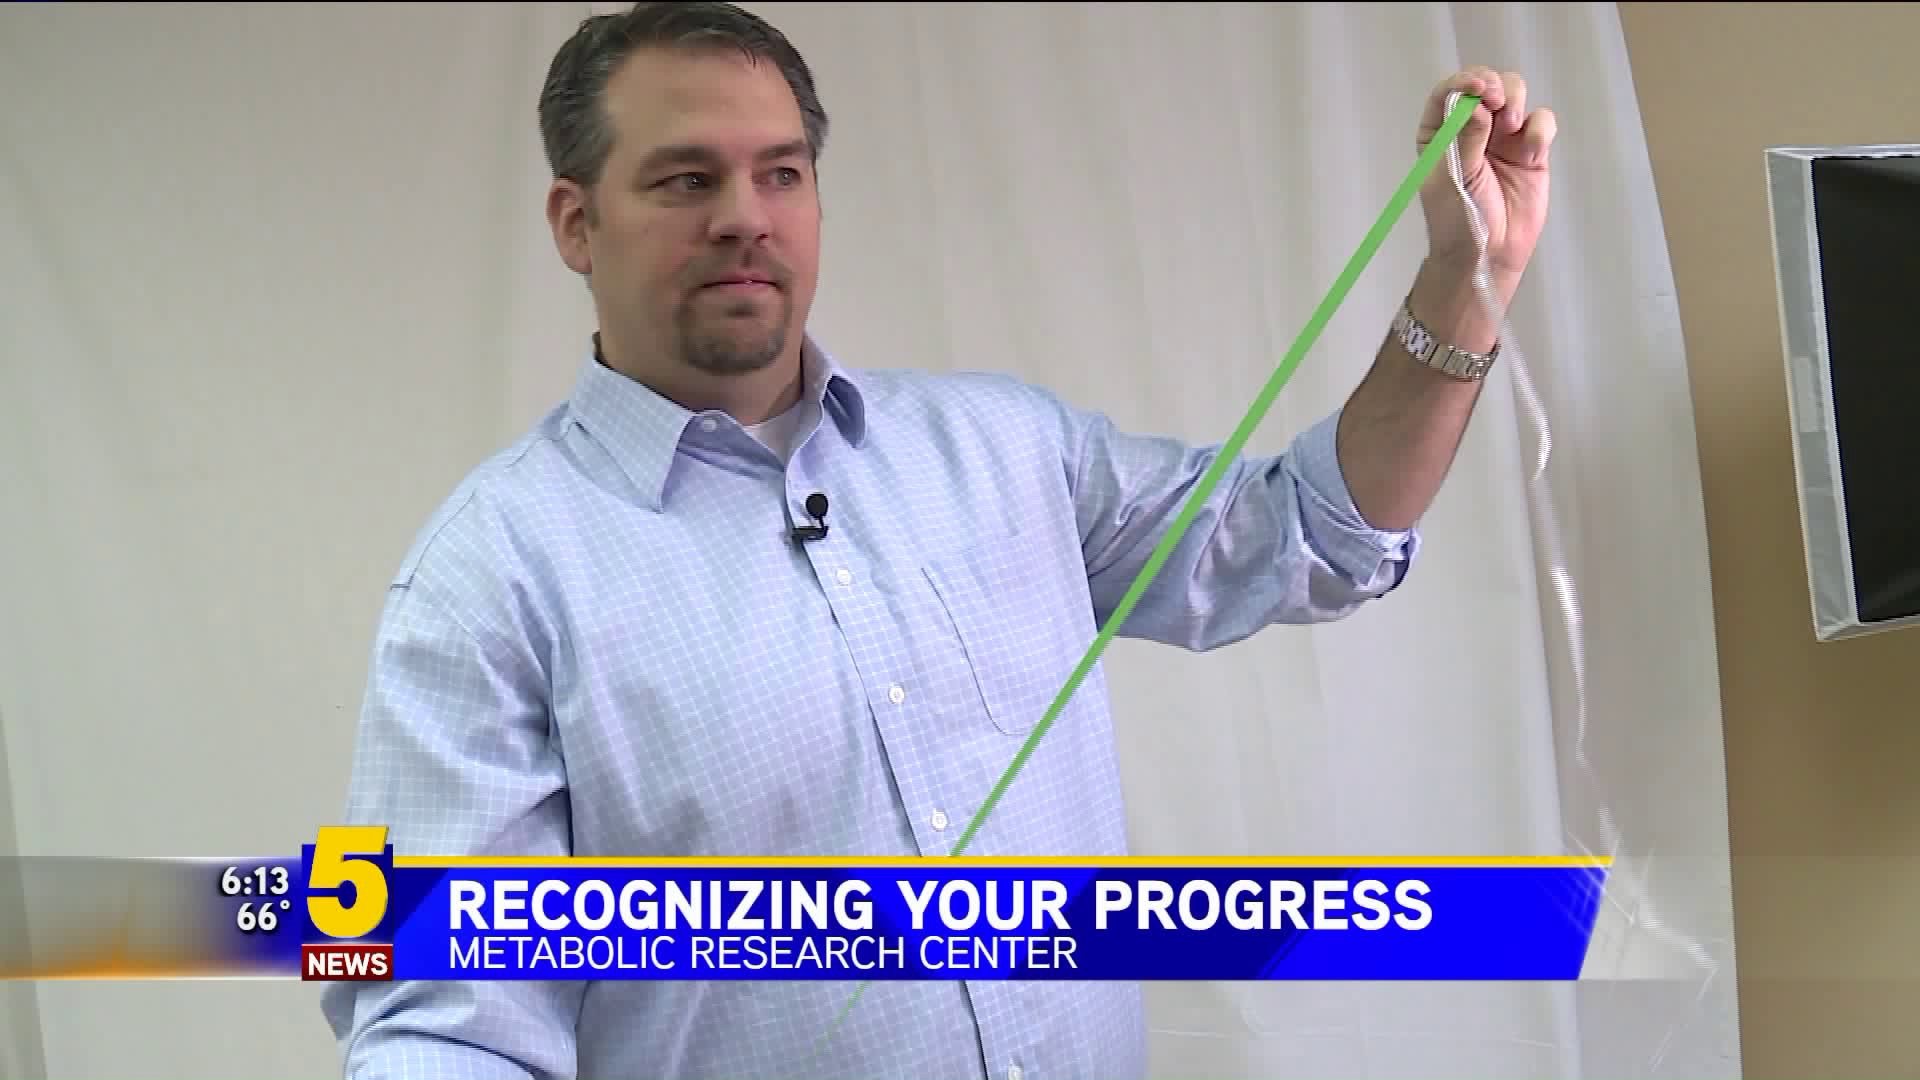 Metabolic Research Center - Recognizing Your Progress - Phase 23